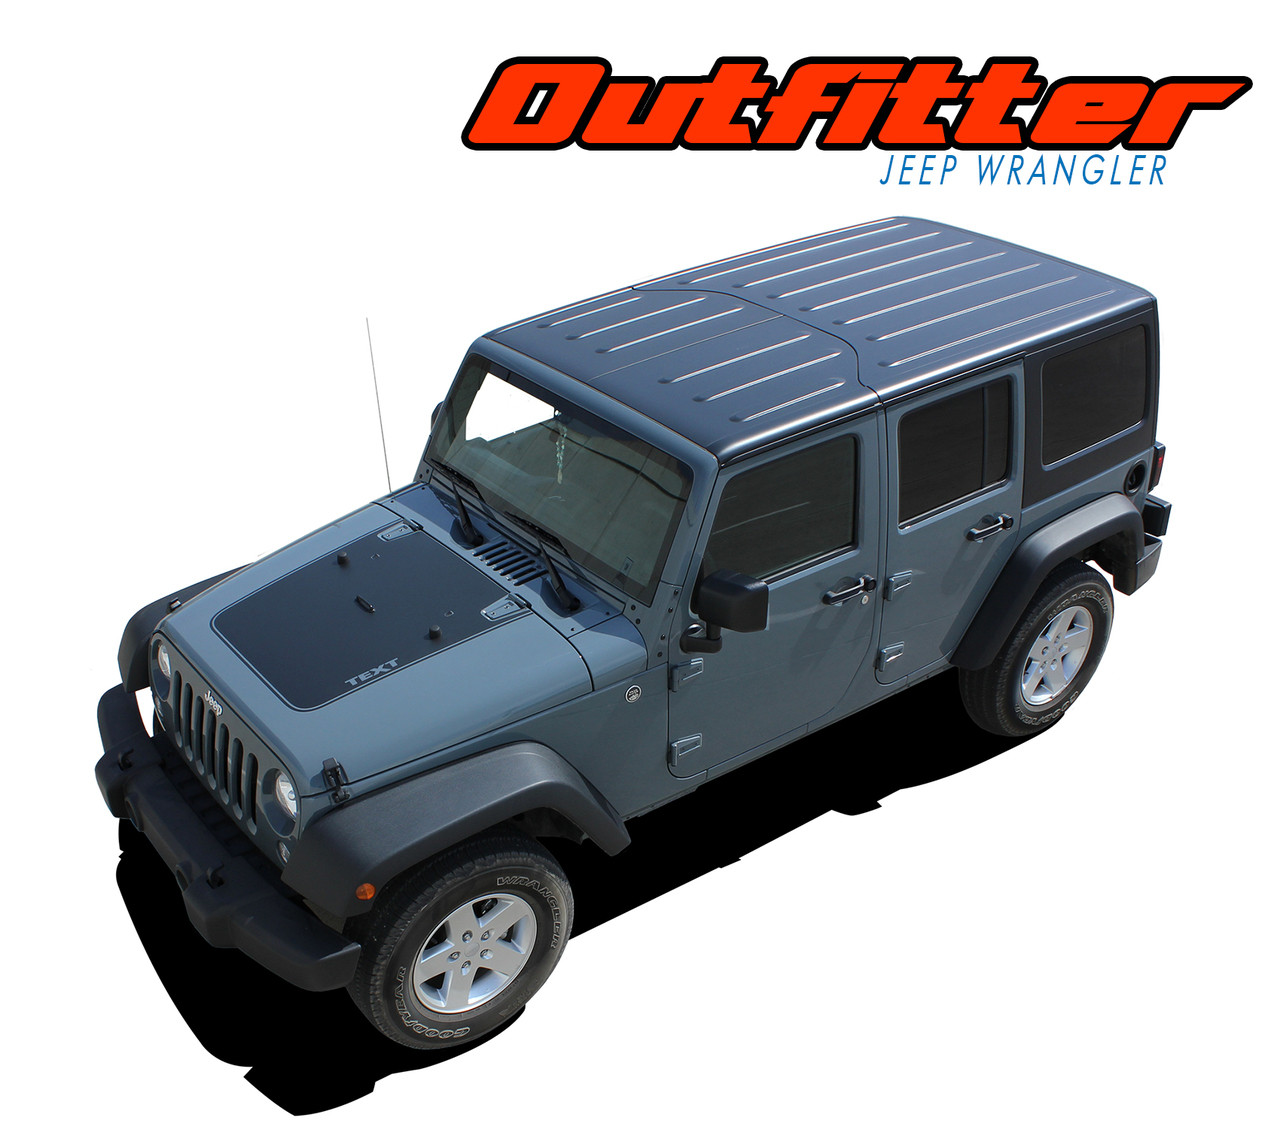 Jeep Wrangler Hood Decals | Jeep Wrangler Hood Stripes | OUTFITTER